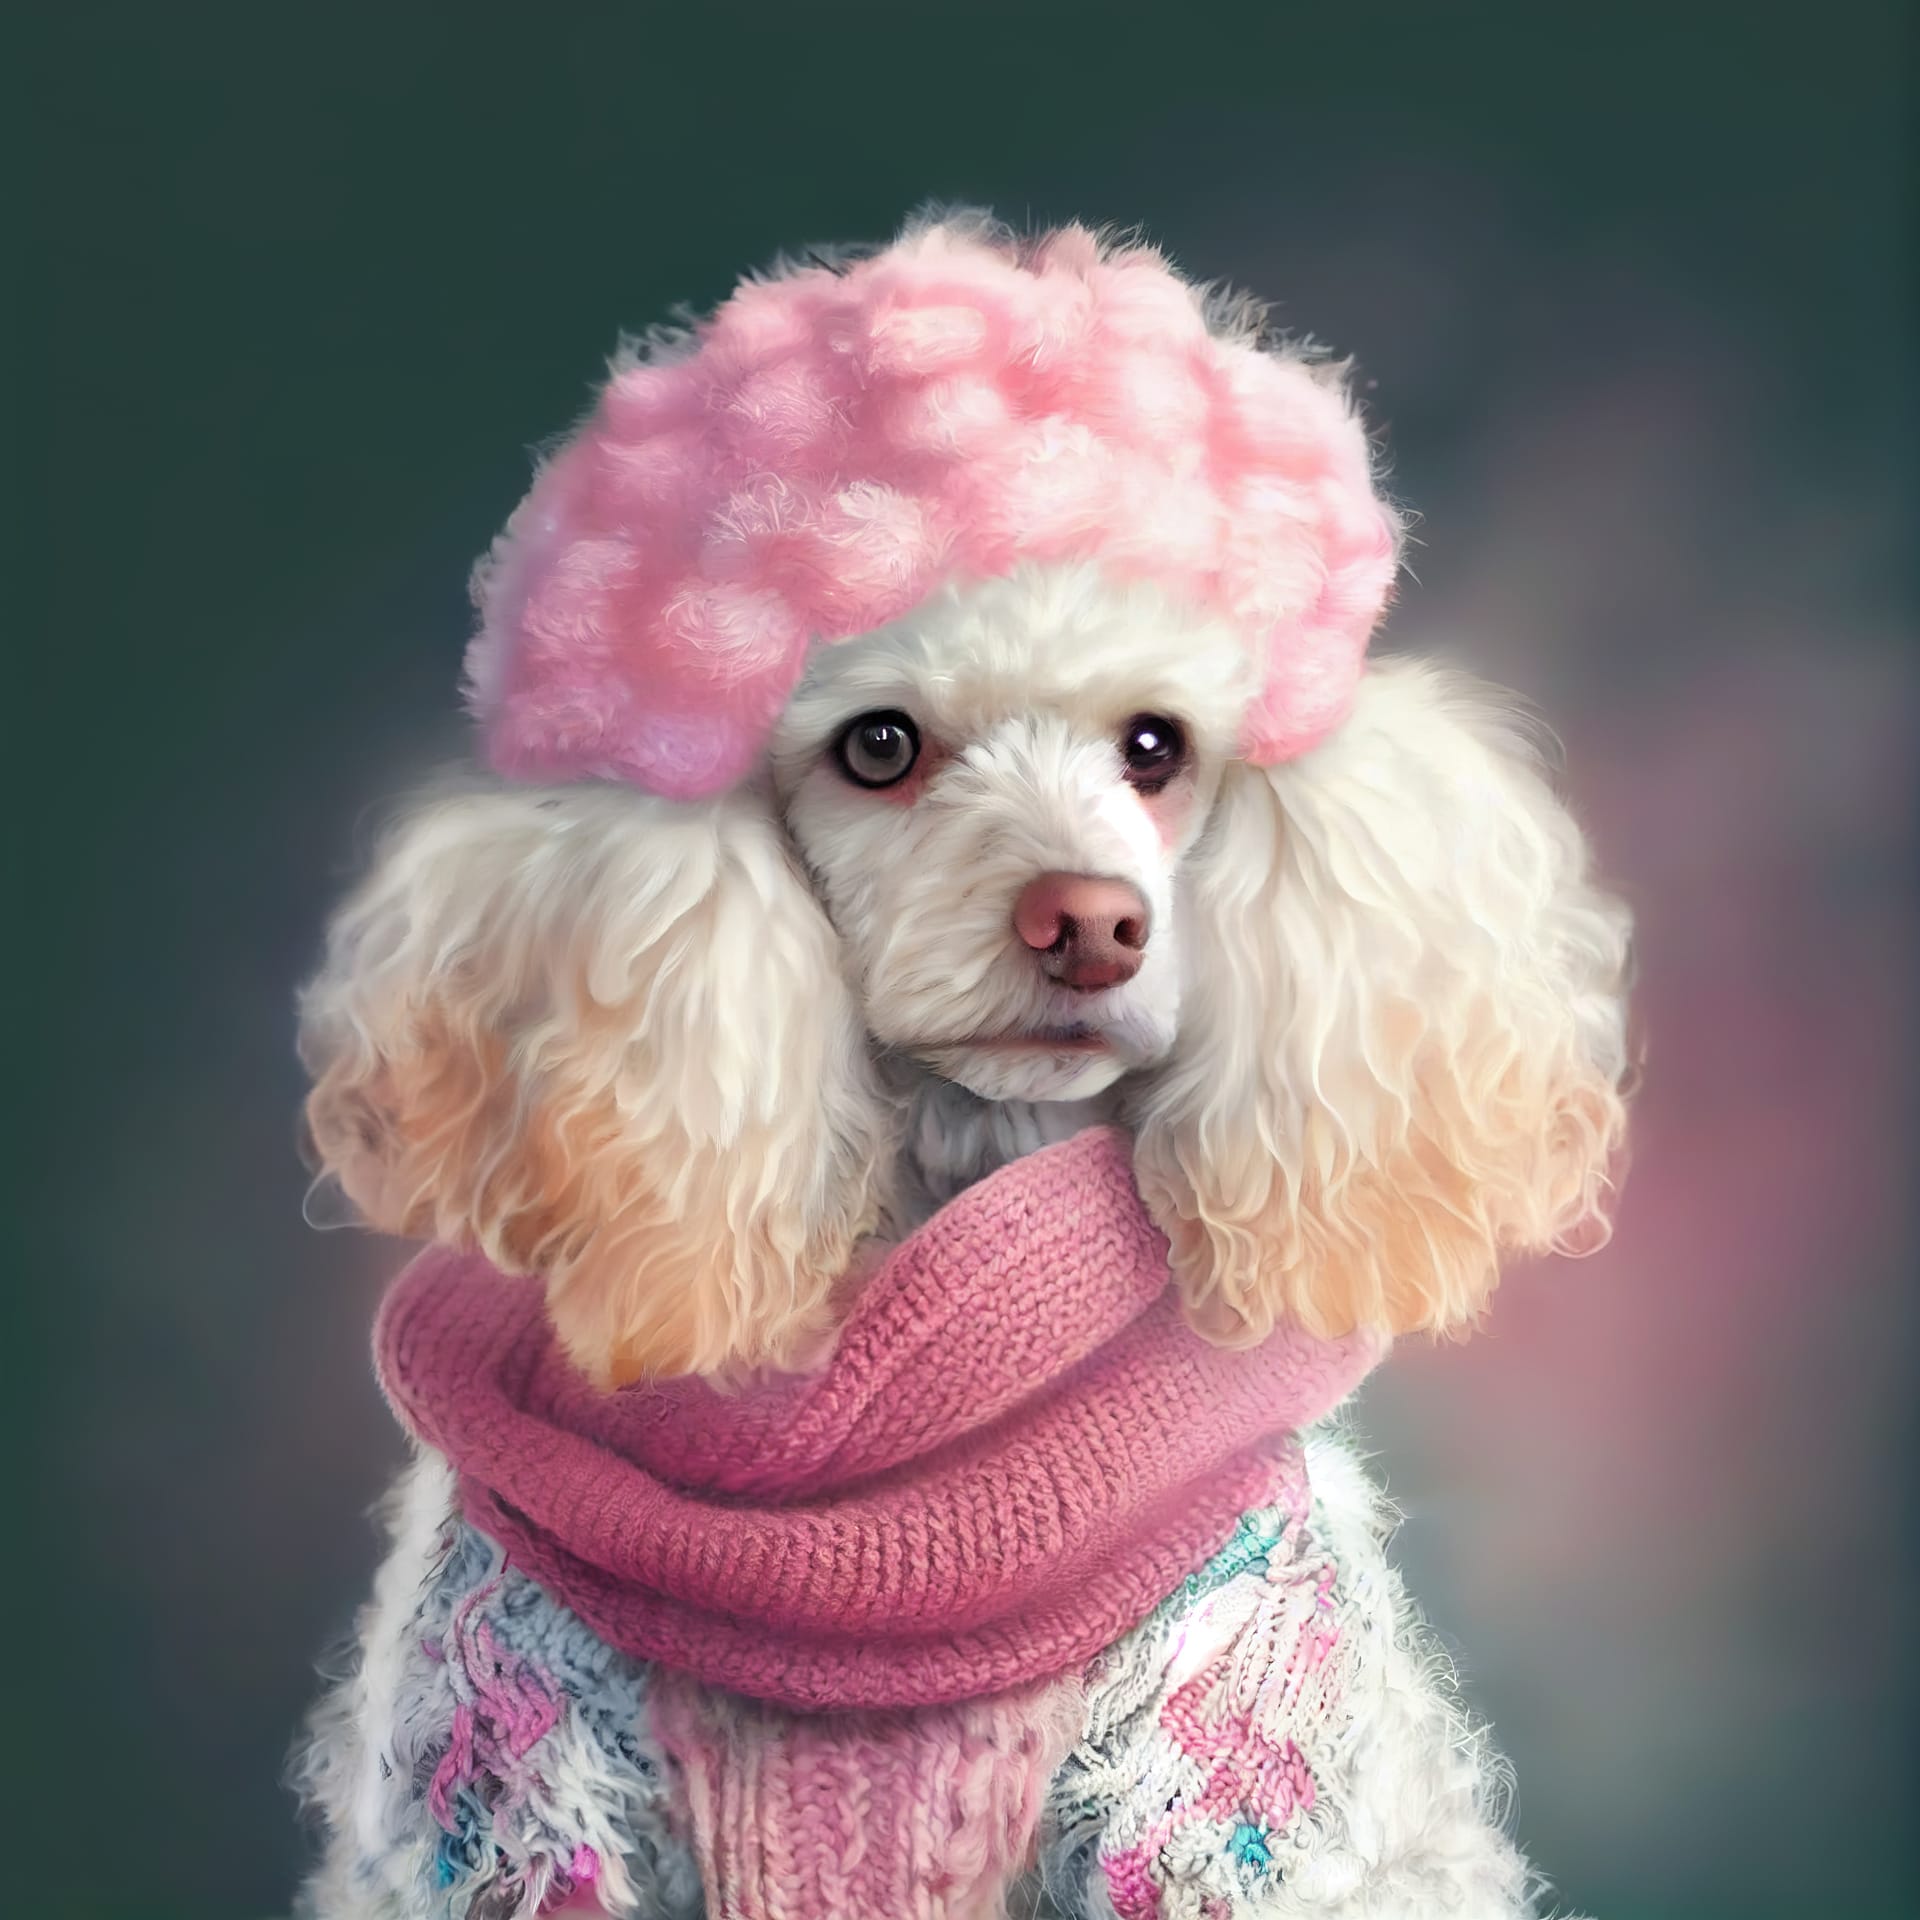 Dog sitting winter park pink knitted hat scarf fine picture